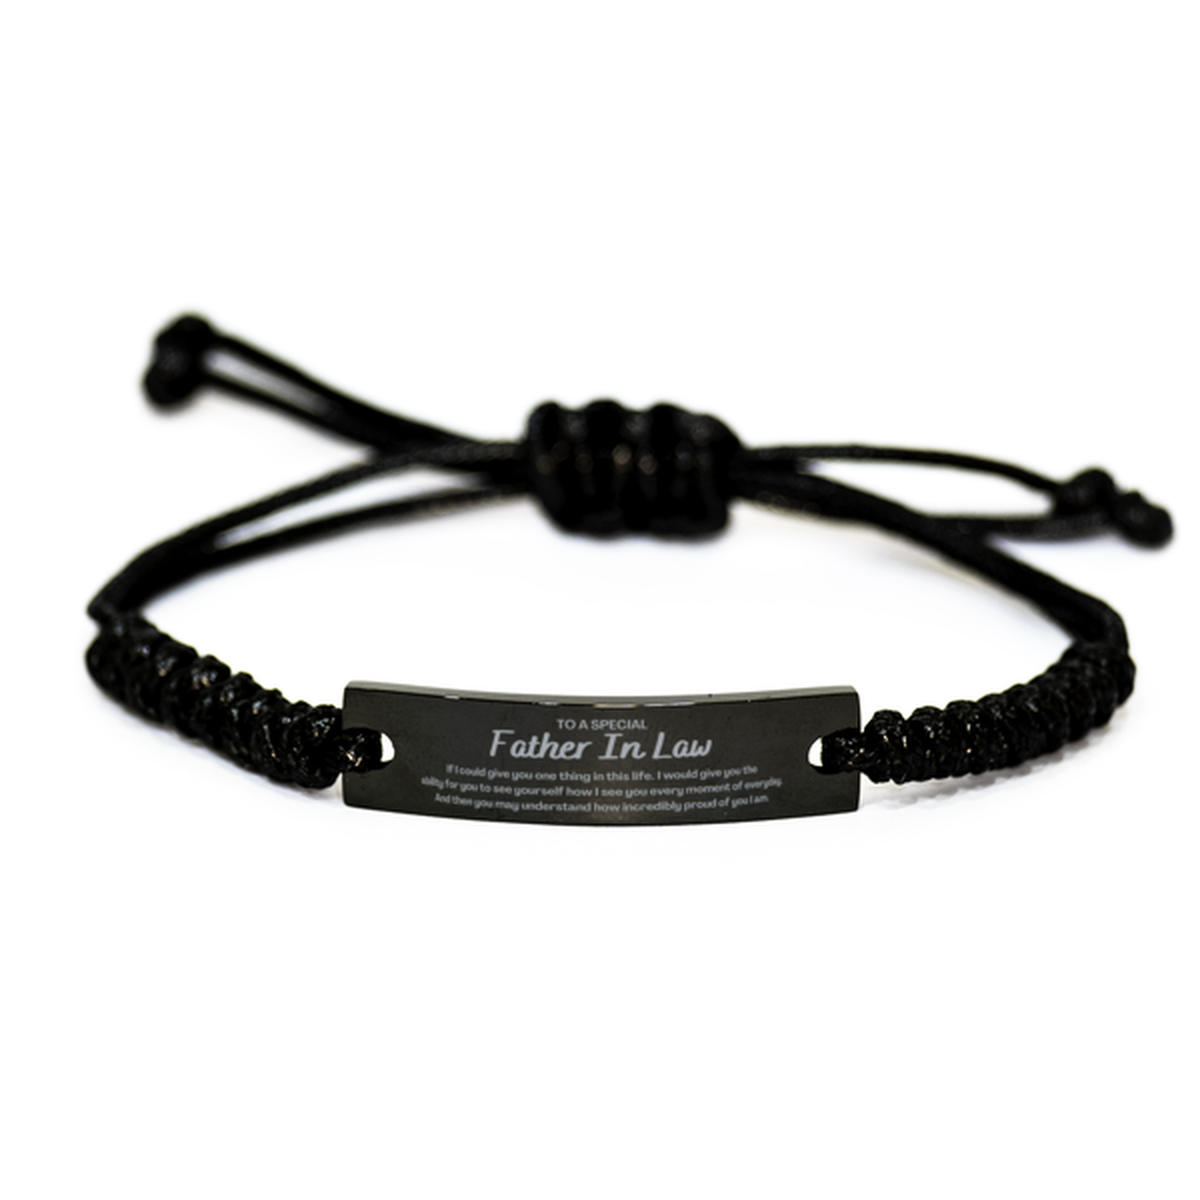 To My Father In Law Black Rope Bracelet, Gifts For Father In Law Engraved, Inspirational Gifts for Christmas Birthday, Epic Gifts for Father In Law To A Special Father In Law how incredibly proud of you I am